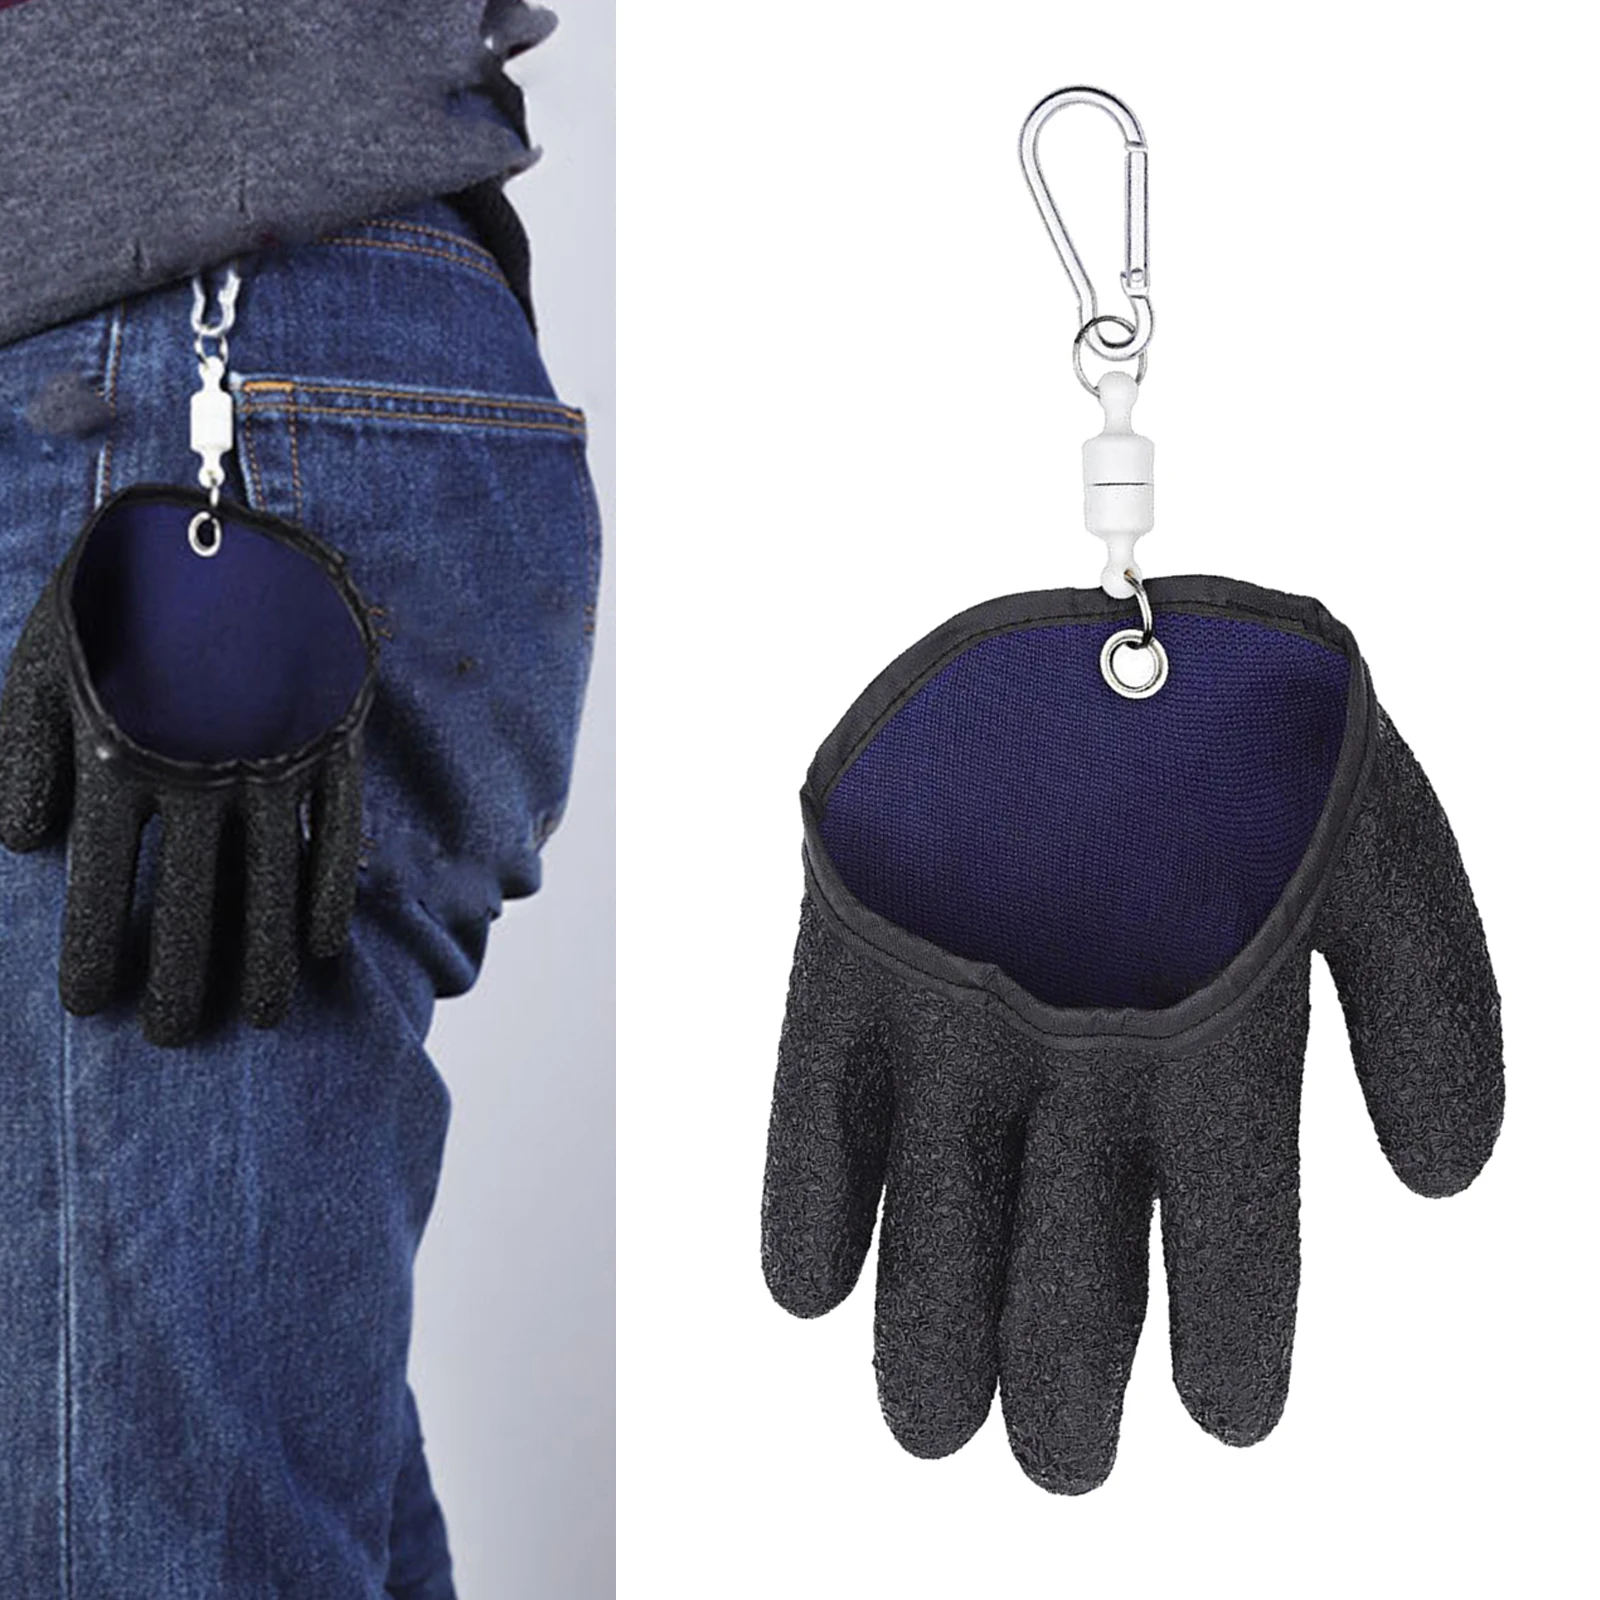 Right/Left Fishing Gloves W/ Magnet Hooks Puncture Resistant Anti- Glove